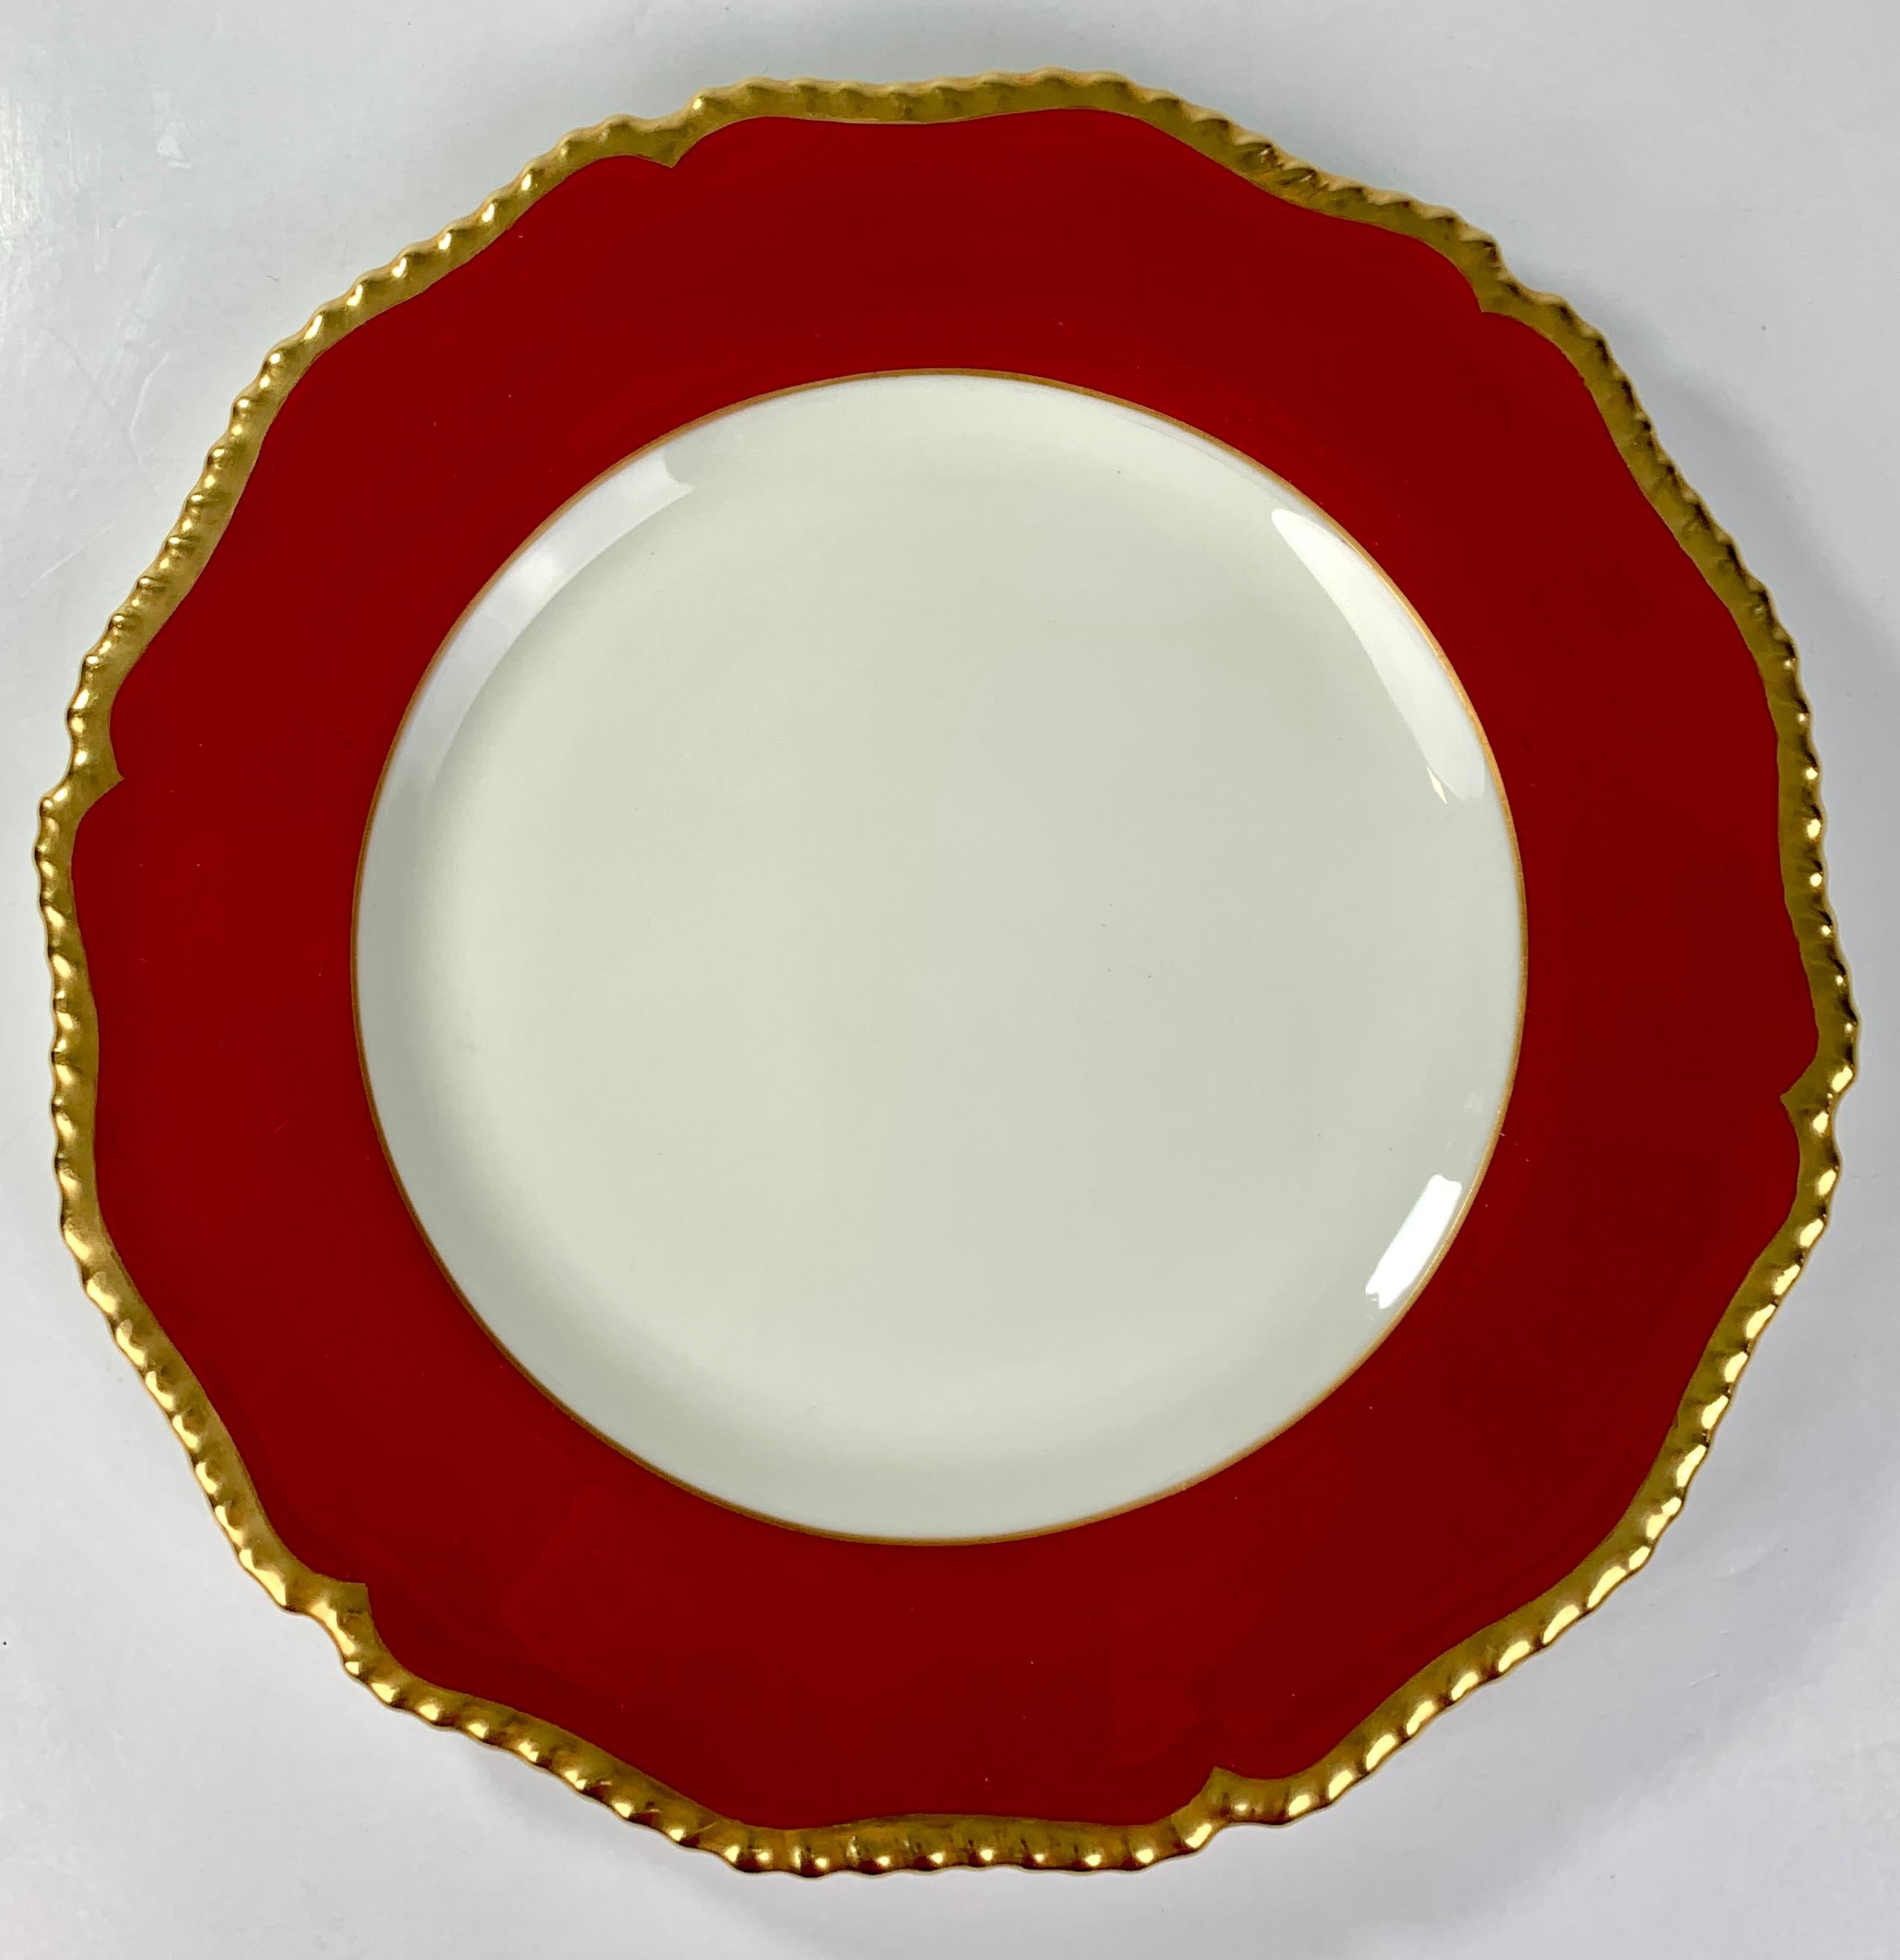 Royal Worcester made this set of twelve fabulous wine-red dinner plates in 1884.
The quality and condition of the porcelain are outstanding. The style is neoclassical and elegant.
The plates measure 10.75